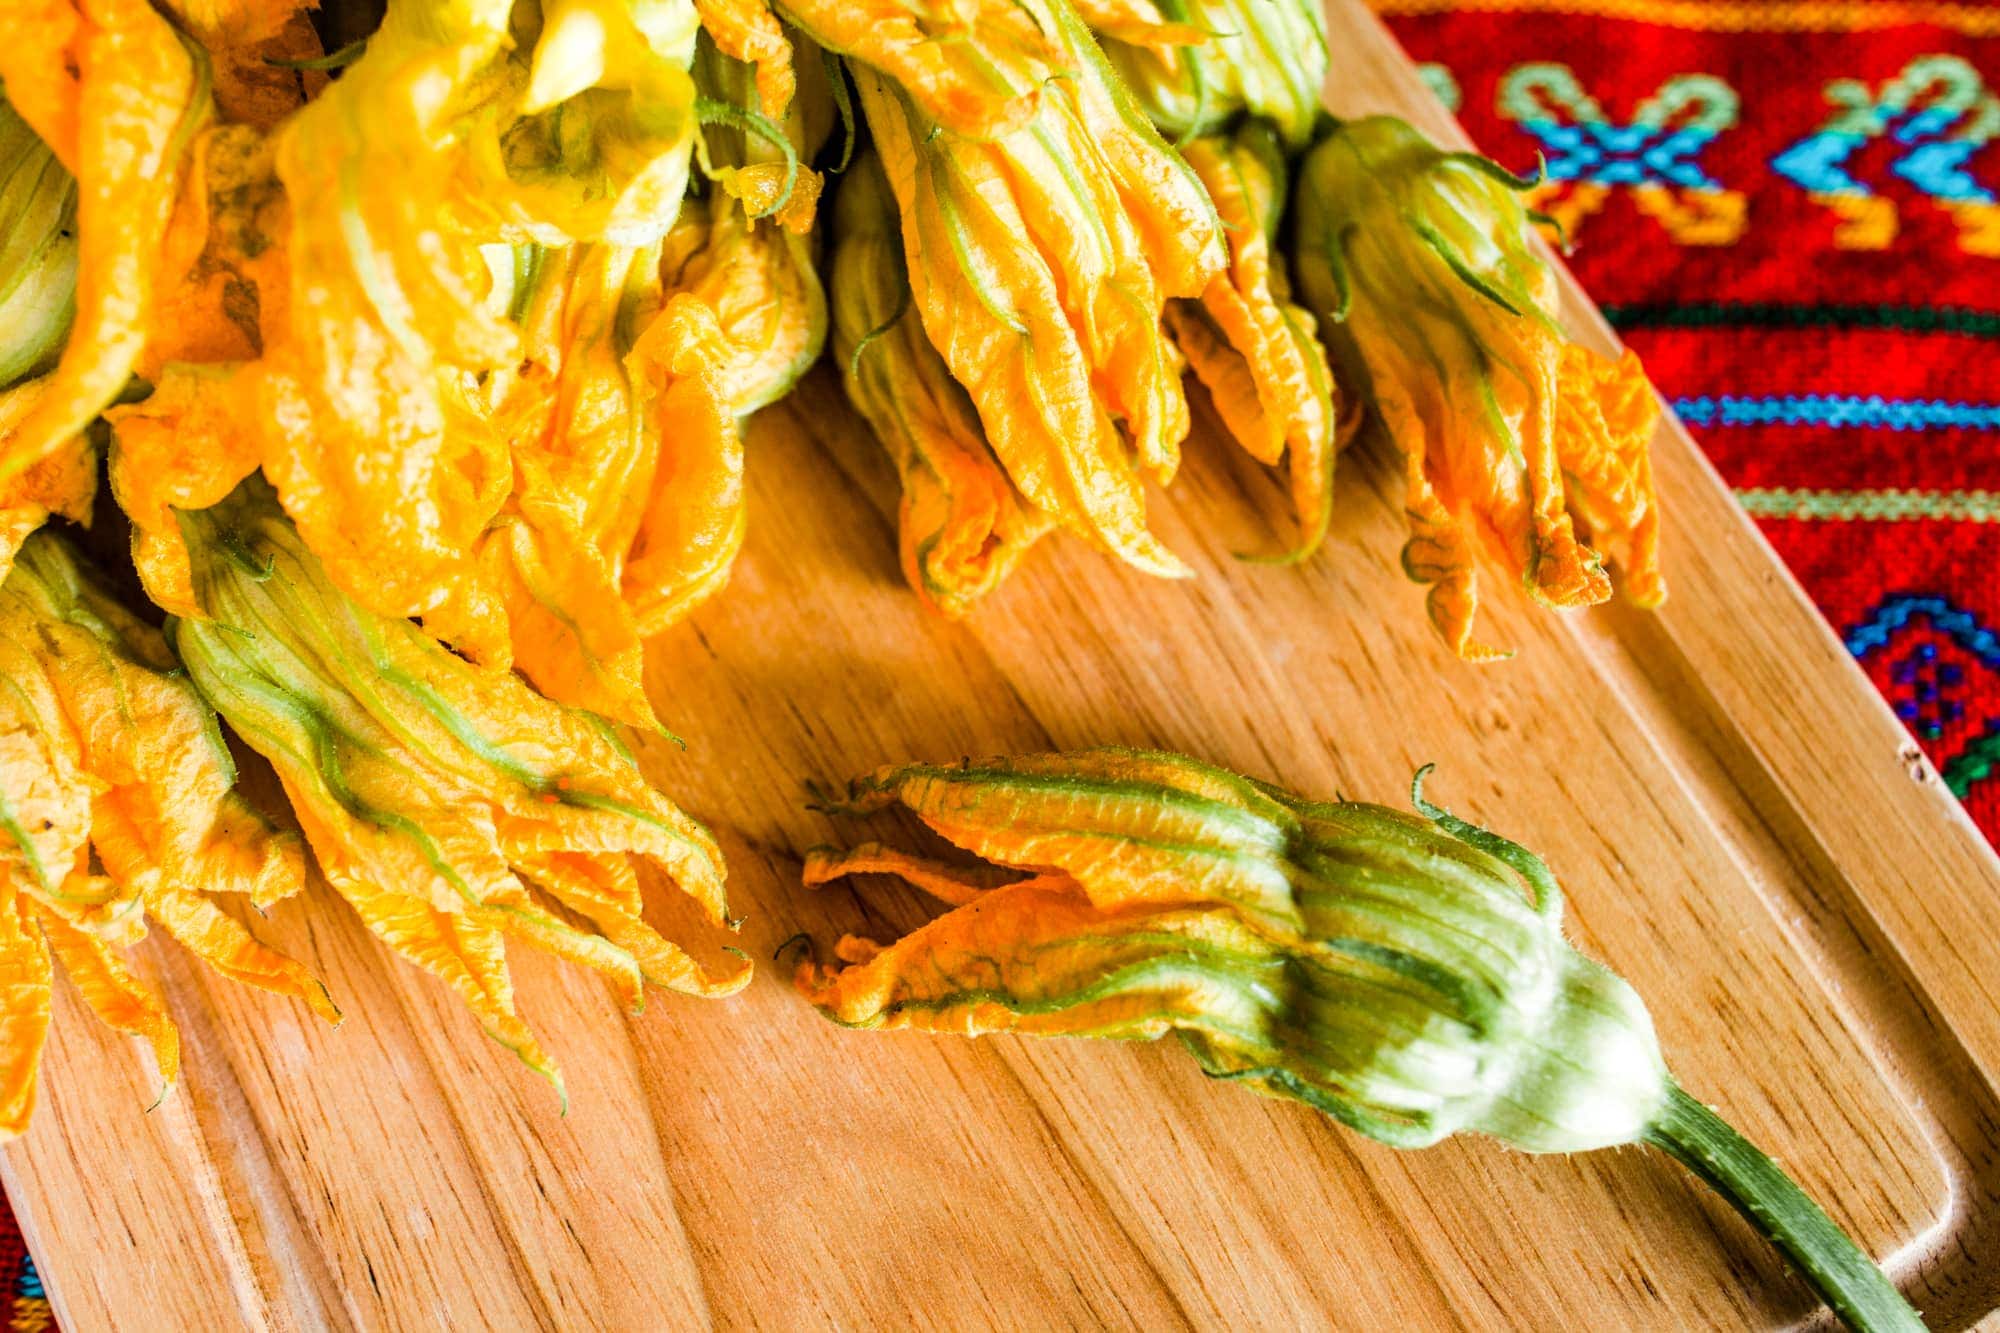 Zucchini flowers on table